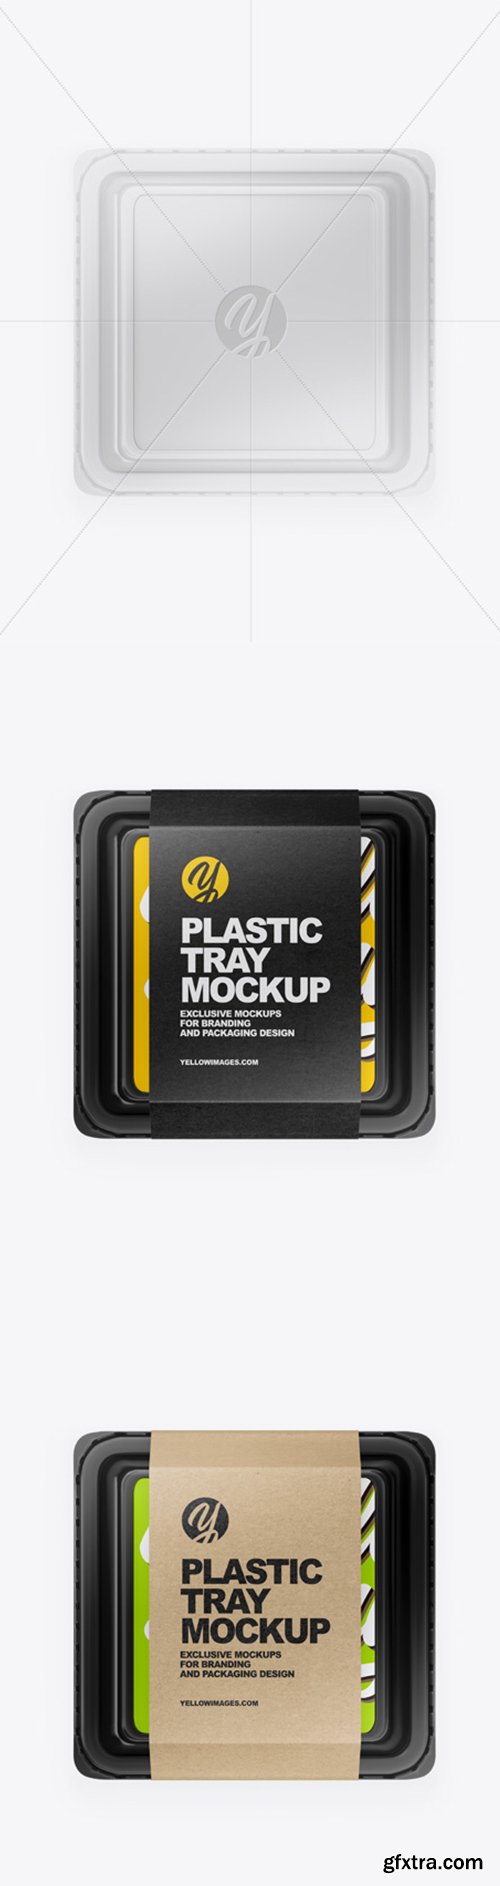 Plastic Tray with Paper Label Mockup 42986